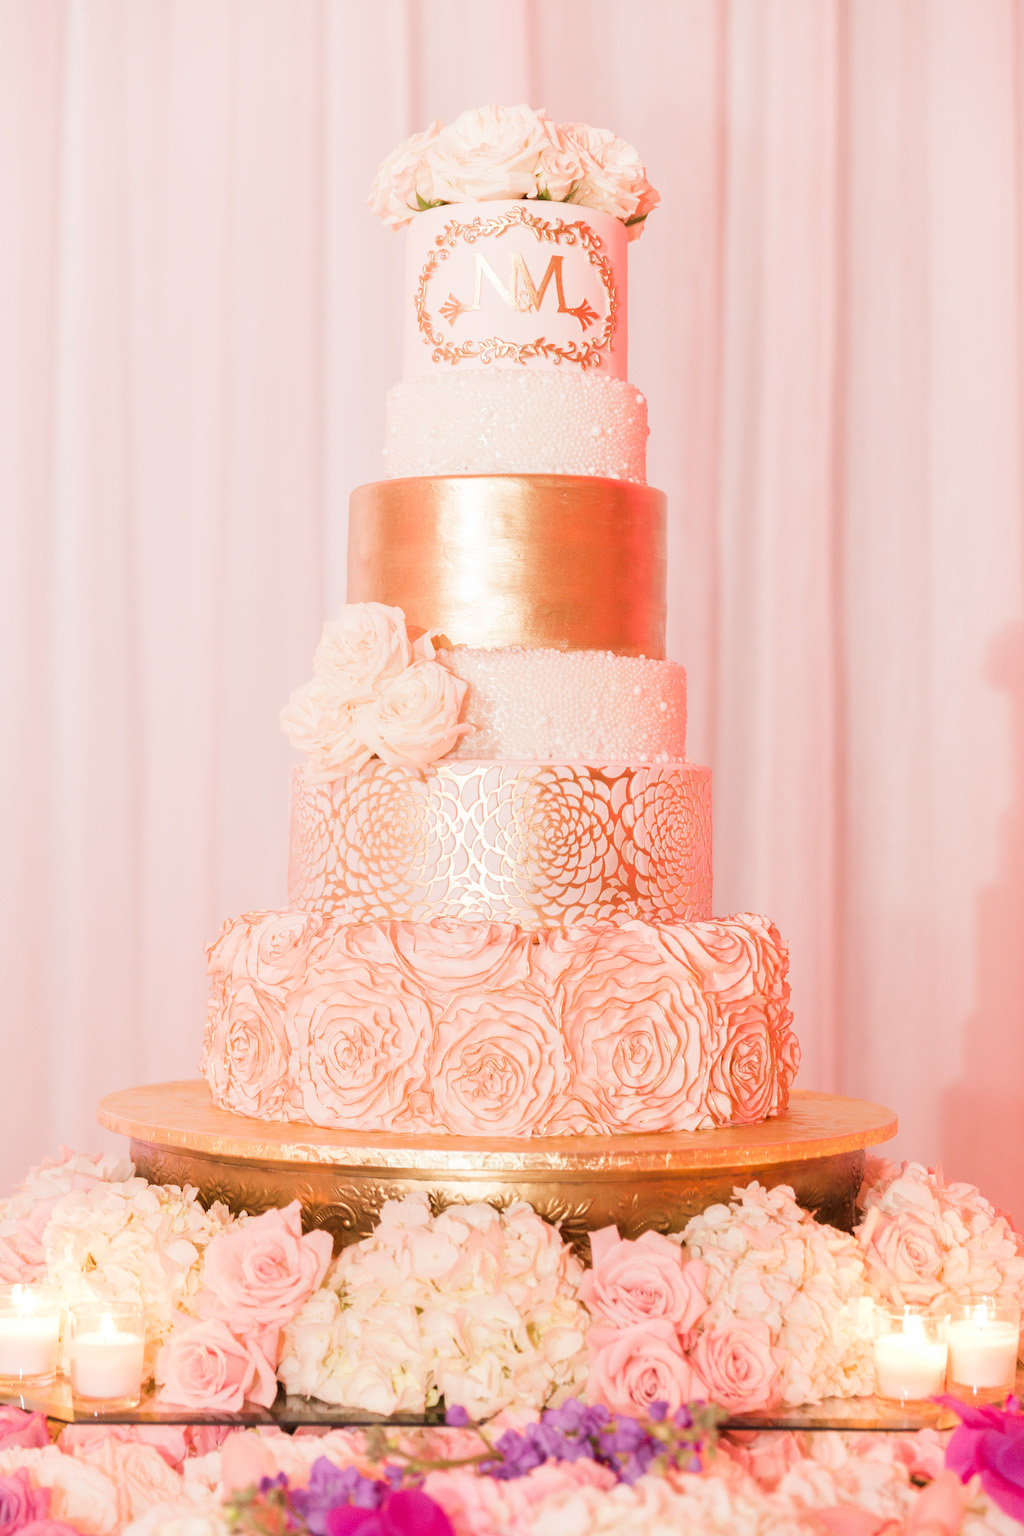 Elegant Six Tier Round Gold and Pink Wedding Cake with Rose Cake Topper on Gold Cake Stand, with Ivory Hydrangeas and Pink Roses